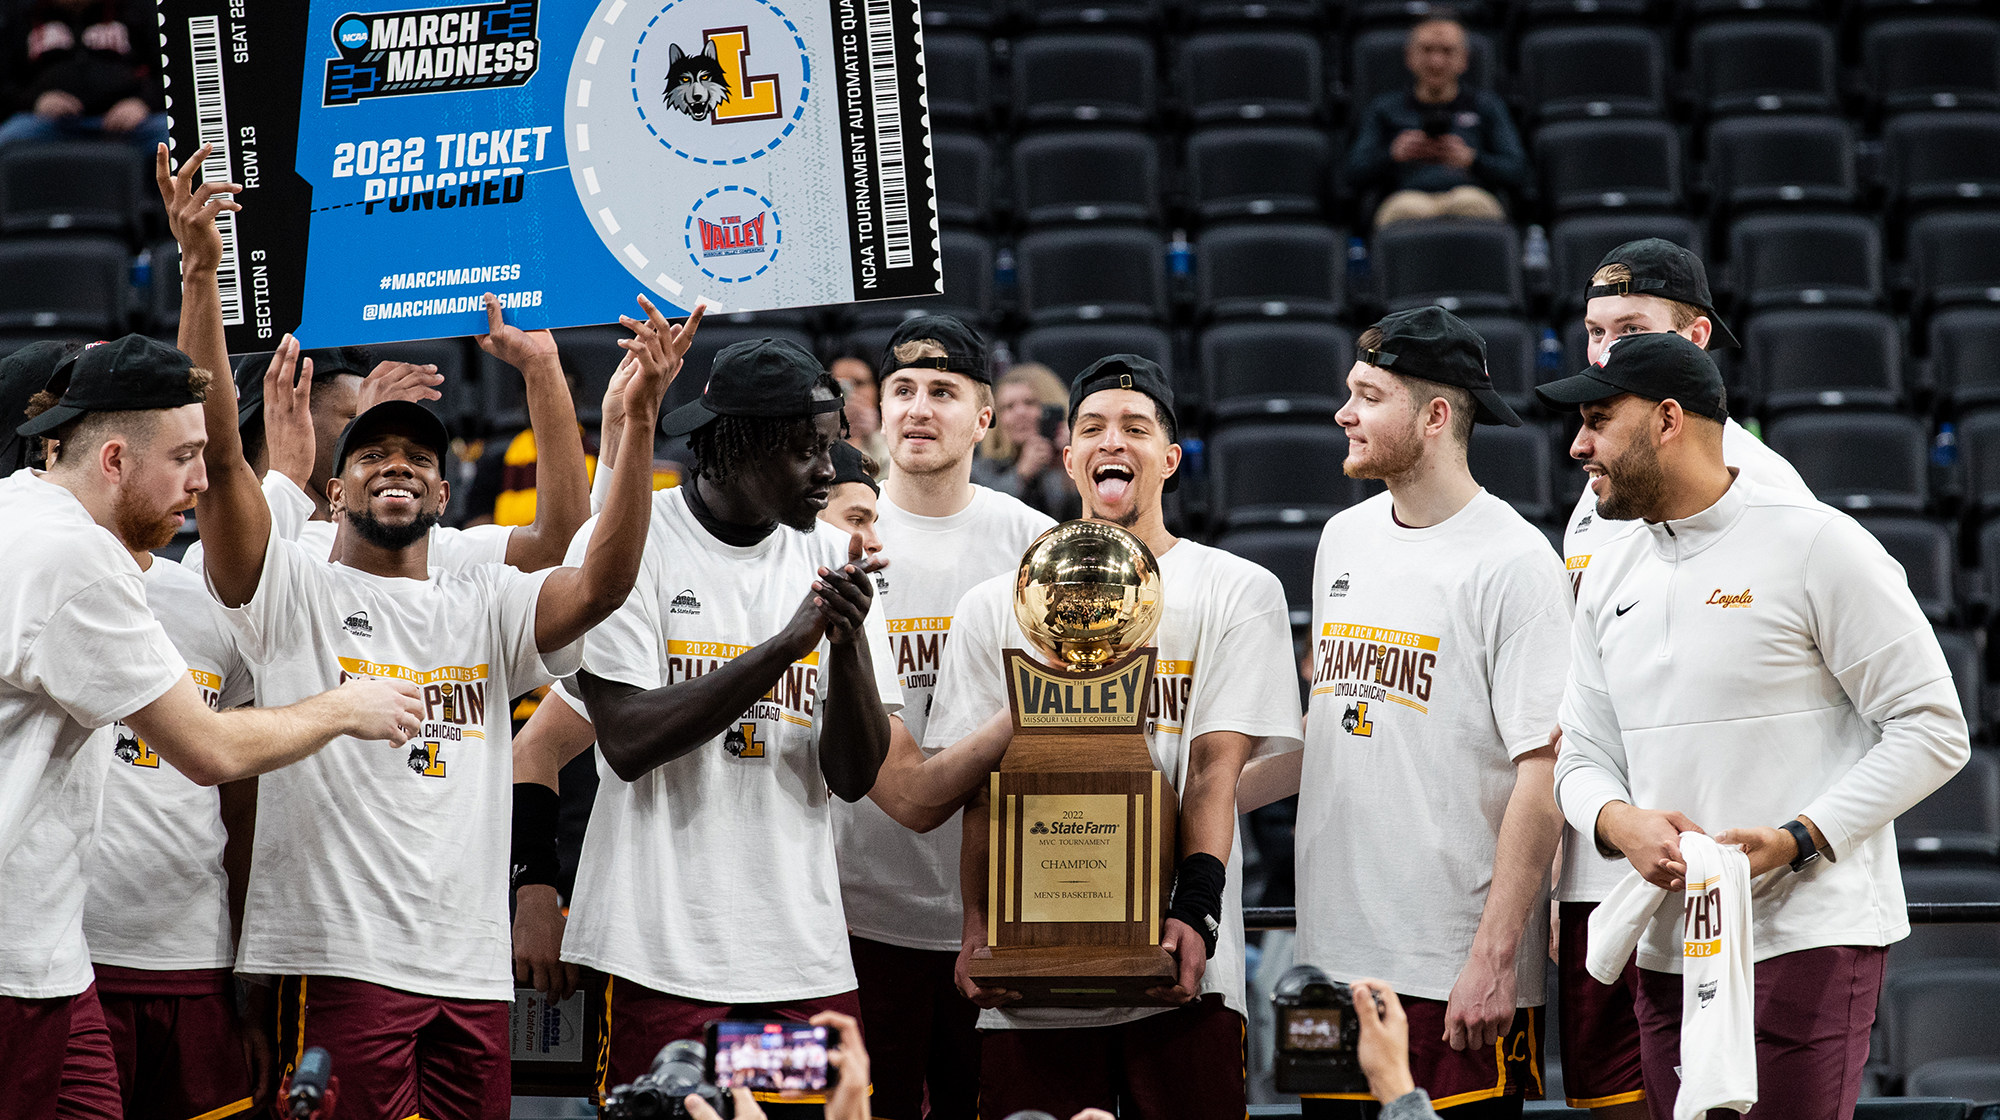 ONCE A RAMBLER, ALWAYS A RAMBLER: From the NCAA championship title in 1963 to the Final Four run in 2018 to the MVC title in 2022, Loyola men’s basketball continues to bring people together. Read more